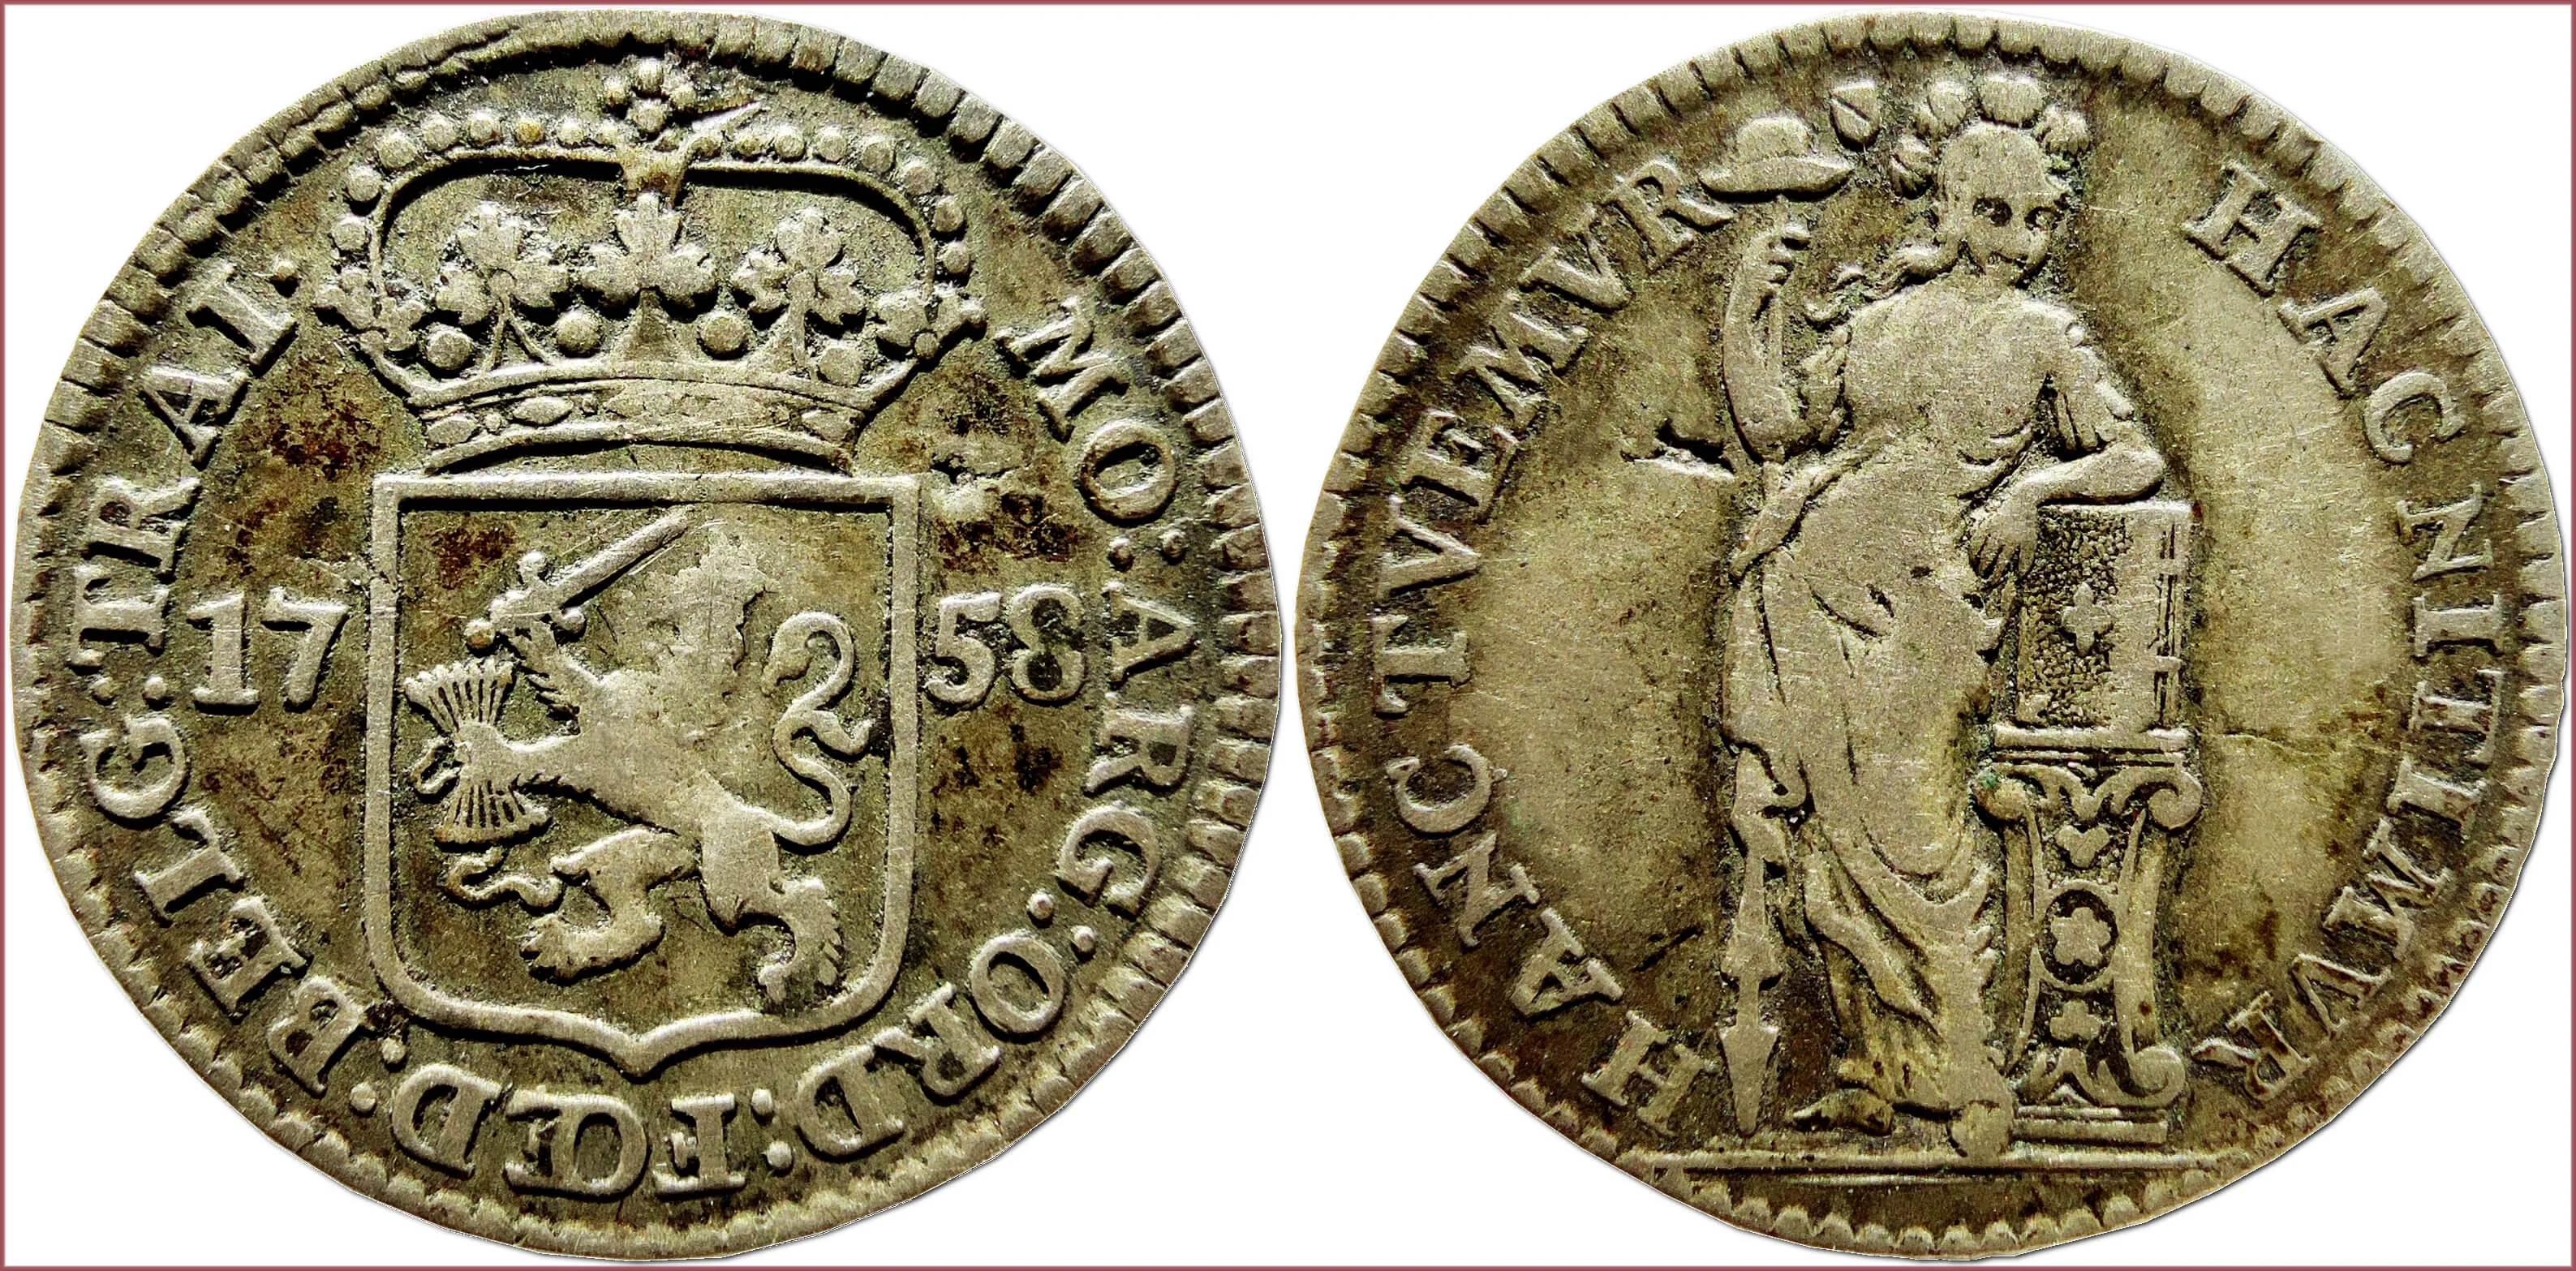 1/4 gulden, 1758: The Republic of the Seven United Netherlands